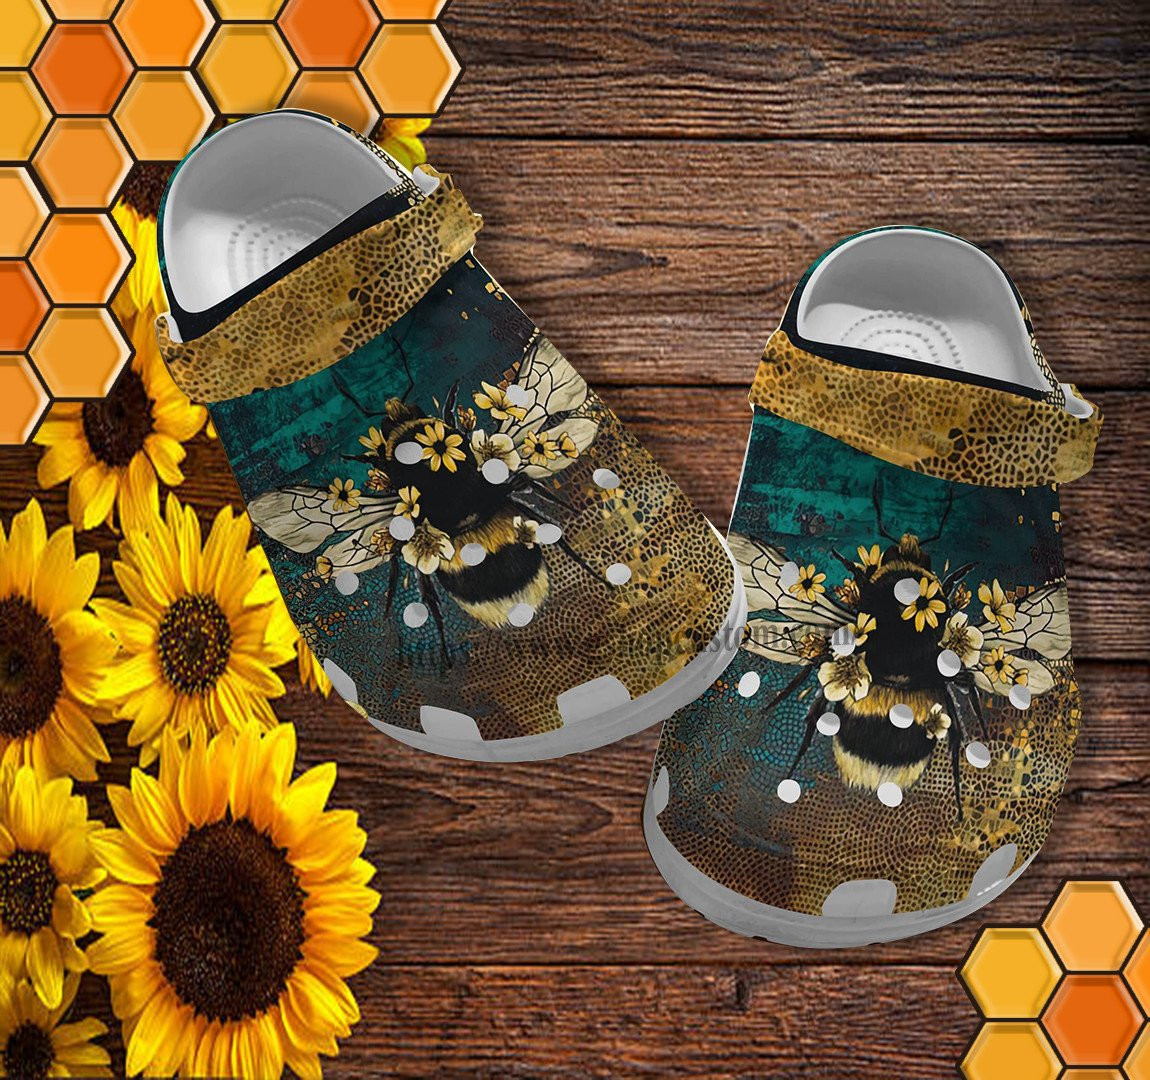 Bee Daisy Boho Twinkle Croc Shoes For Women- Bee Kind Hippie Daisy Sunflower Shoes Croc Clogs Gift Daughter